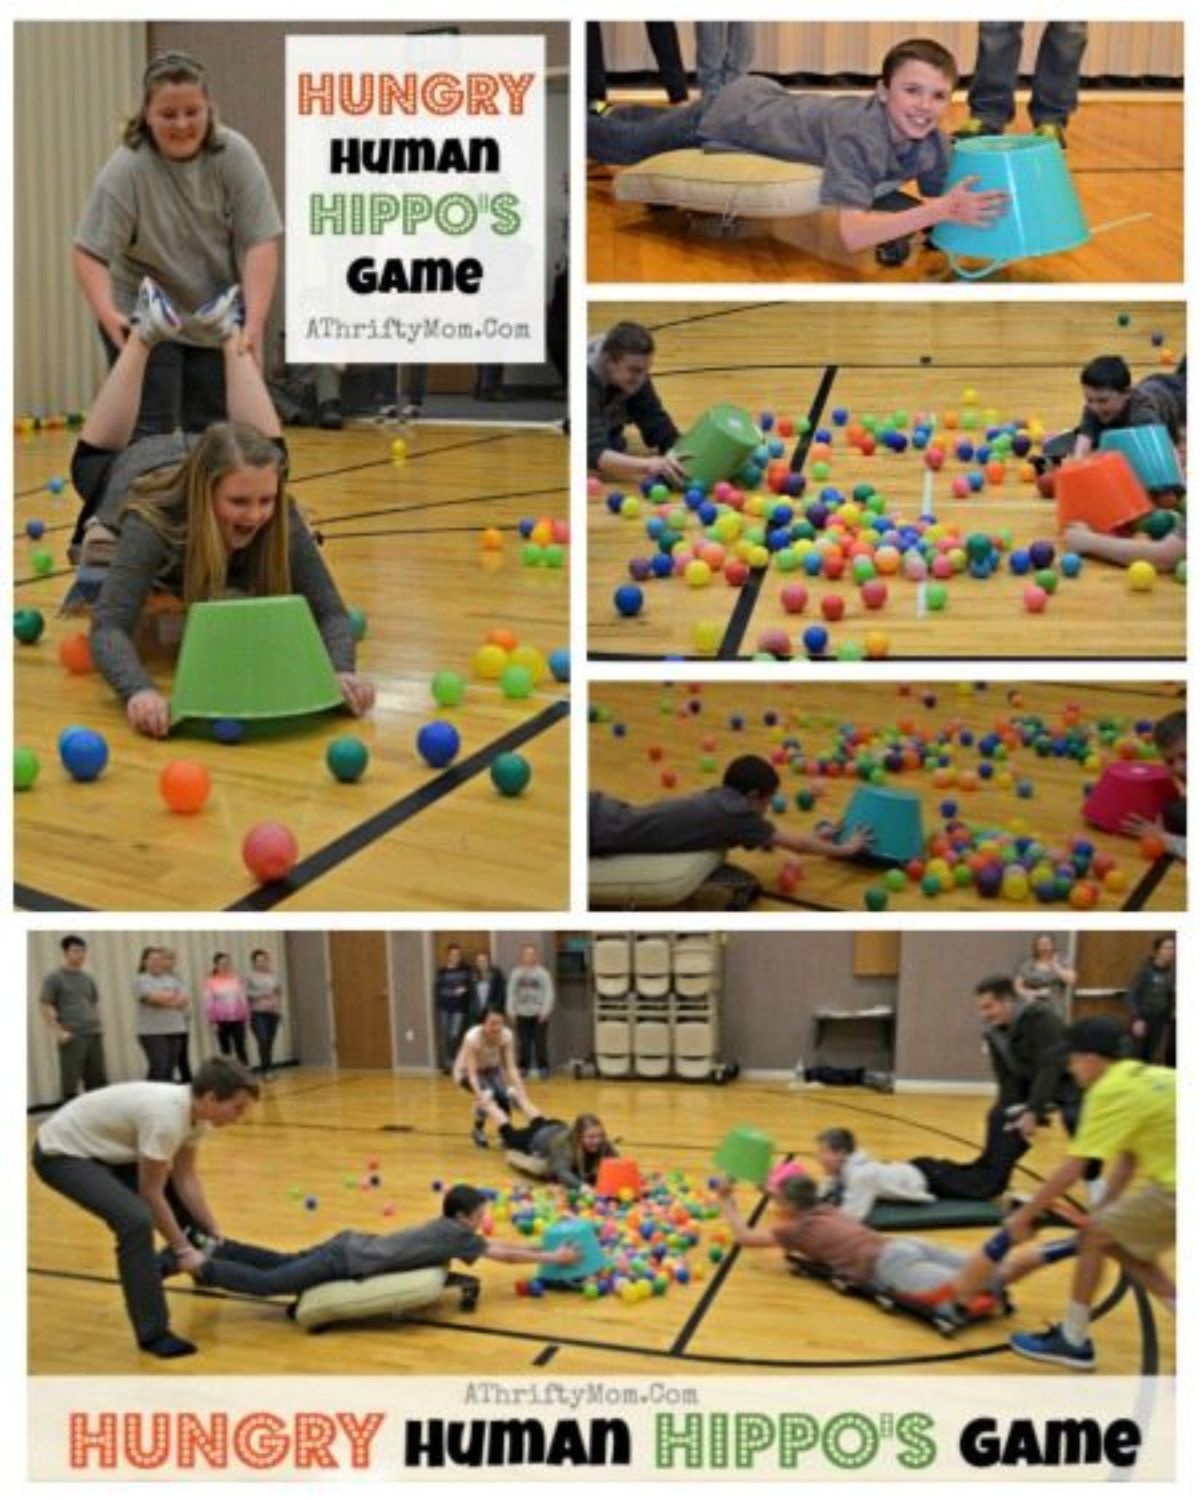 Seveeral pictures of a group of people playing hungry hippos, holding onto the legs of their partners and helping them collect ball pool balls with buckets.